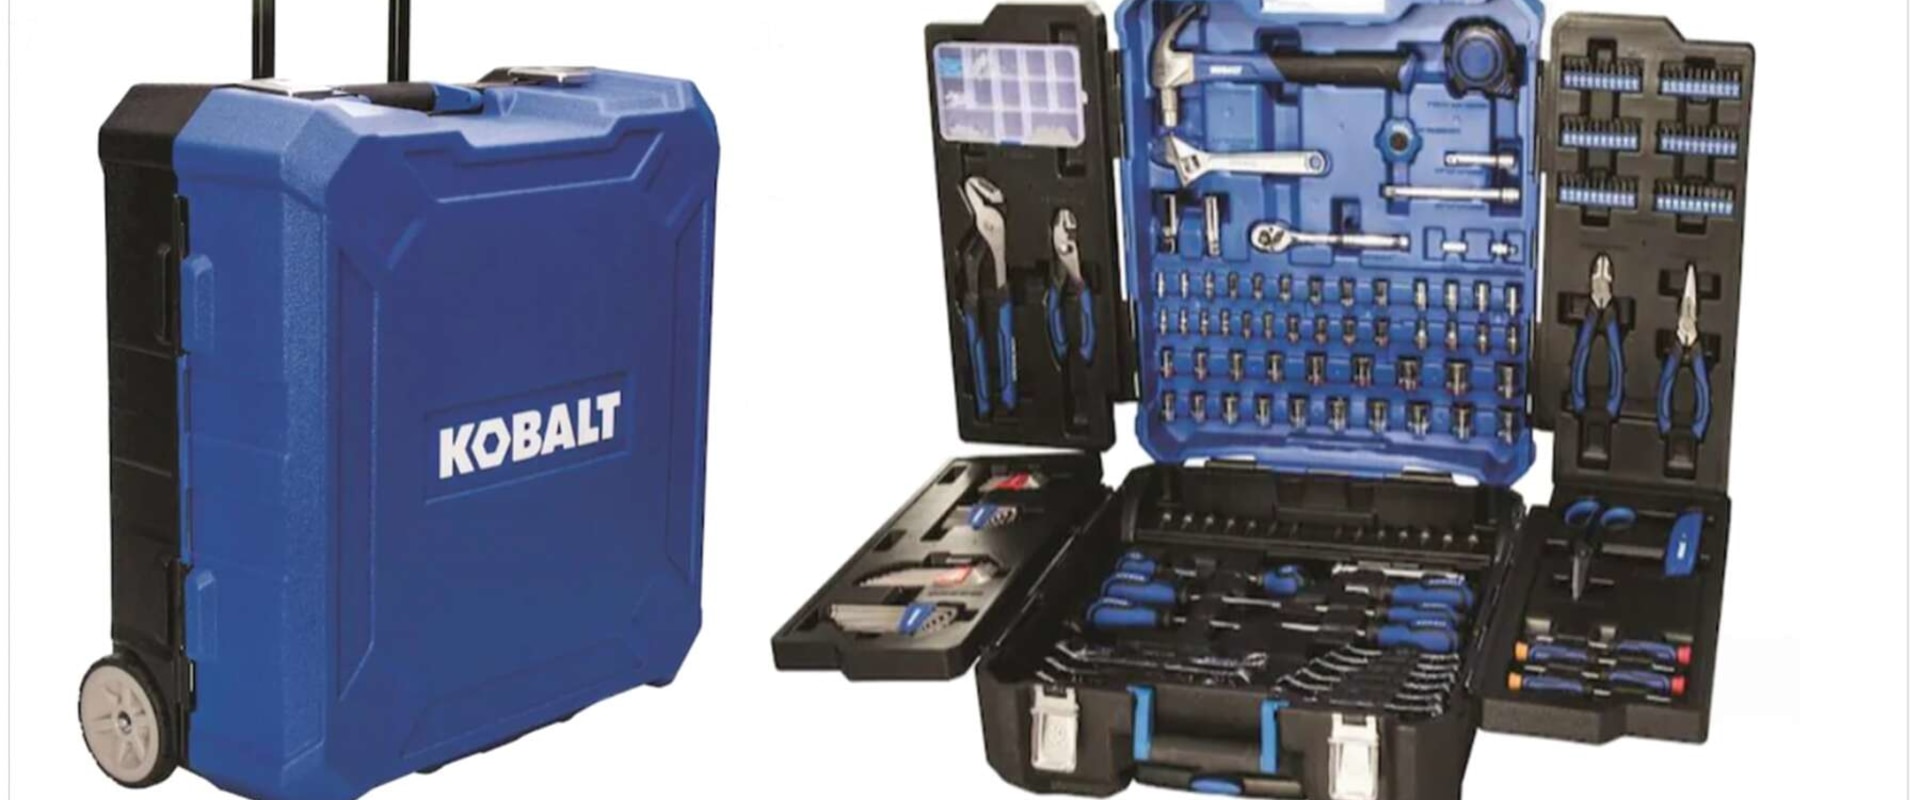 Who manufactures kobalt tools for lowe's?